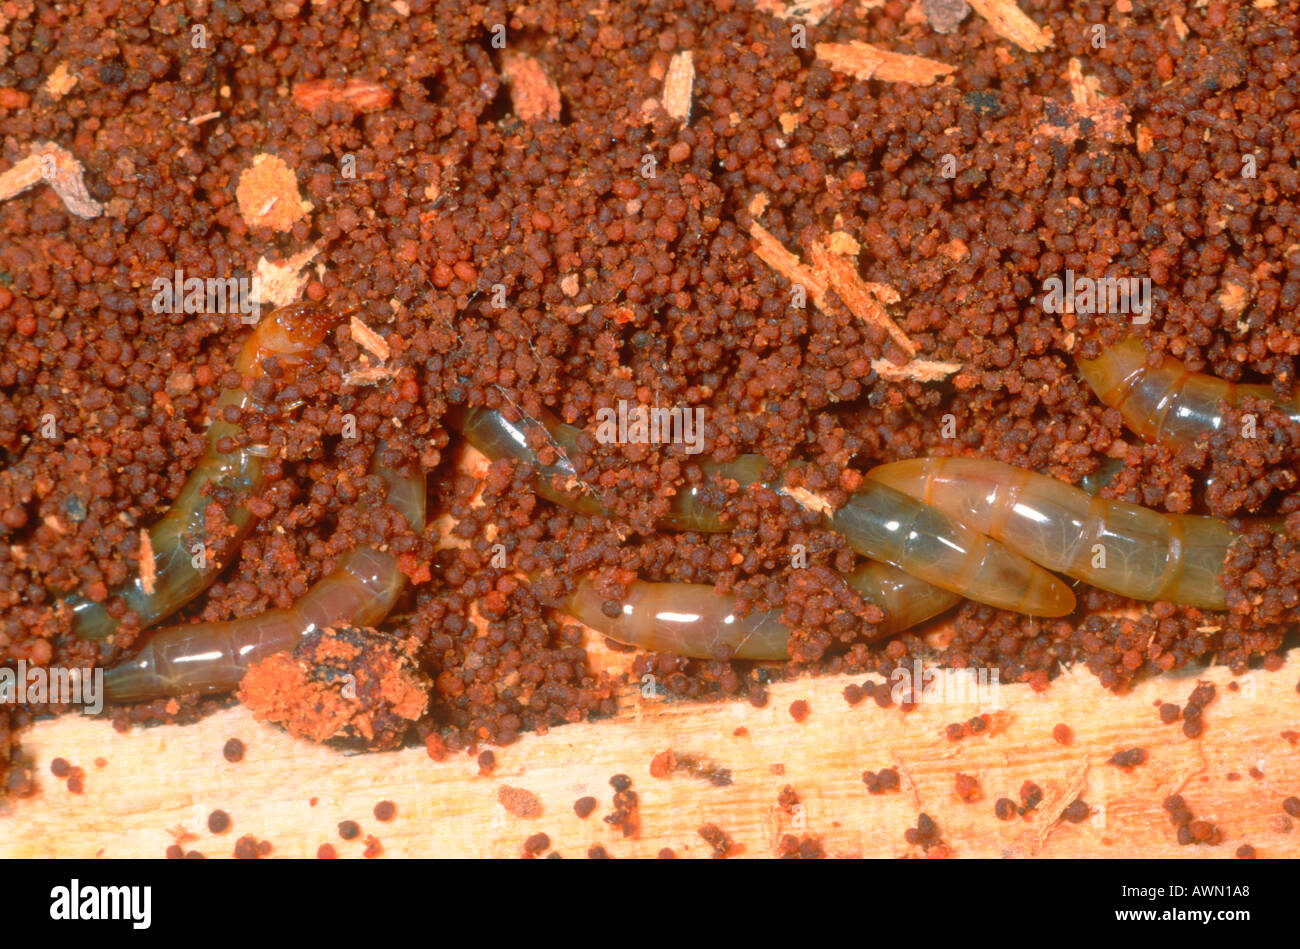 Mealworm Beetles, Tenebrio molitor. Larvae on rotted timber Stock Photo